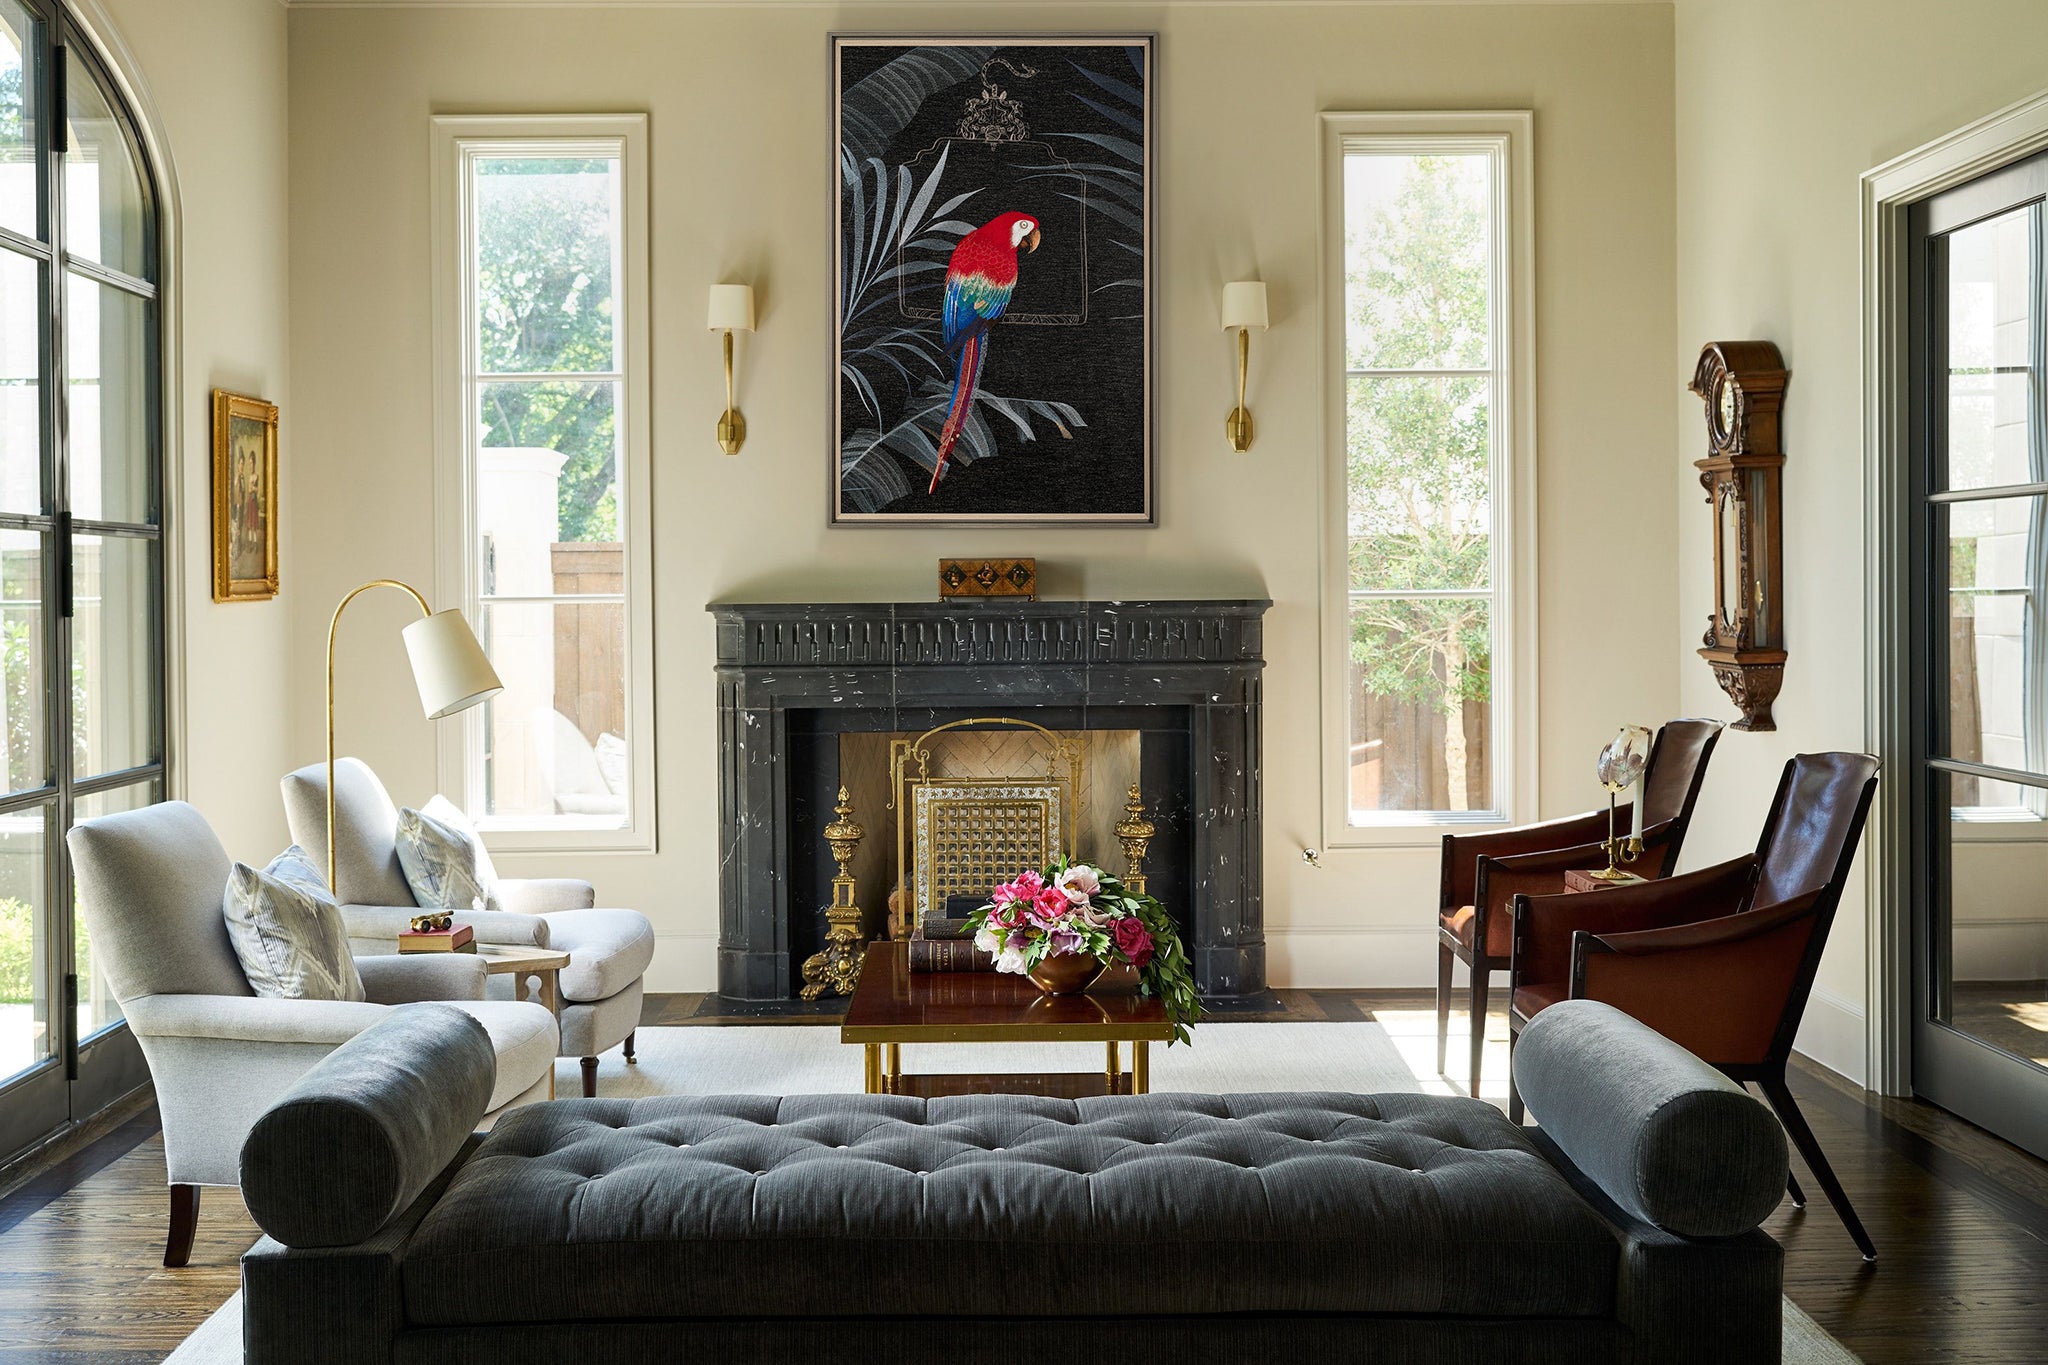 An framed embroidery art work embroidered with tropical parrots is hung on the wall above the fireplace in the living room. With bright flowers, the whole living room is very vibrant.